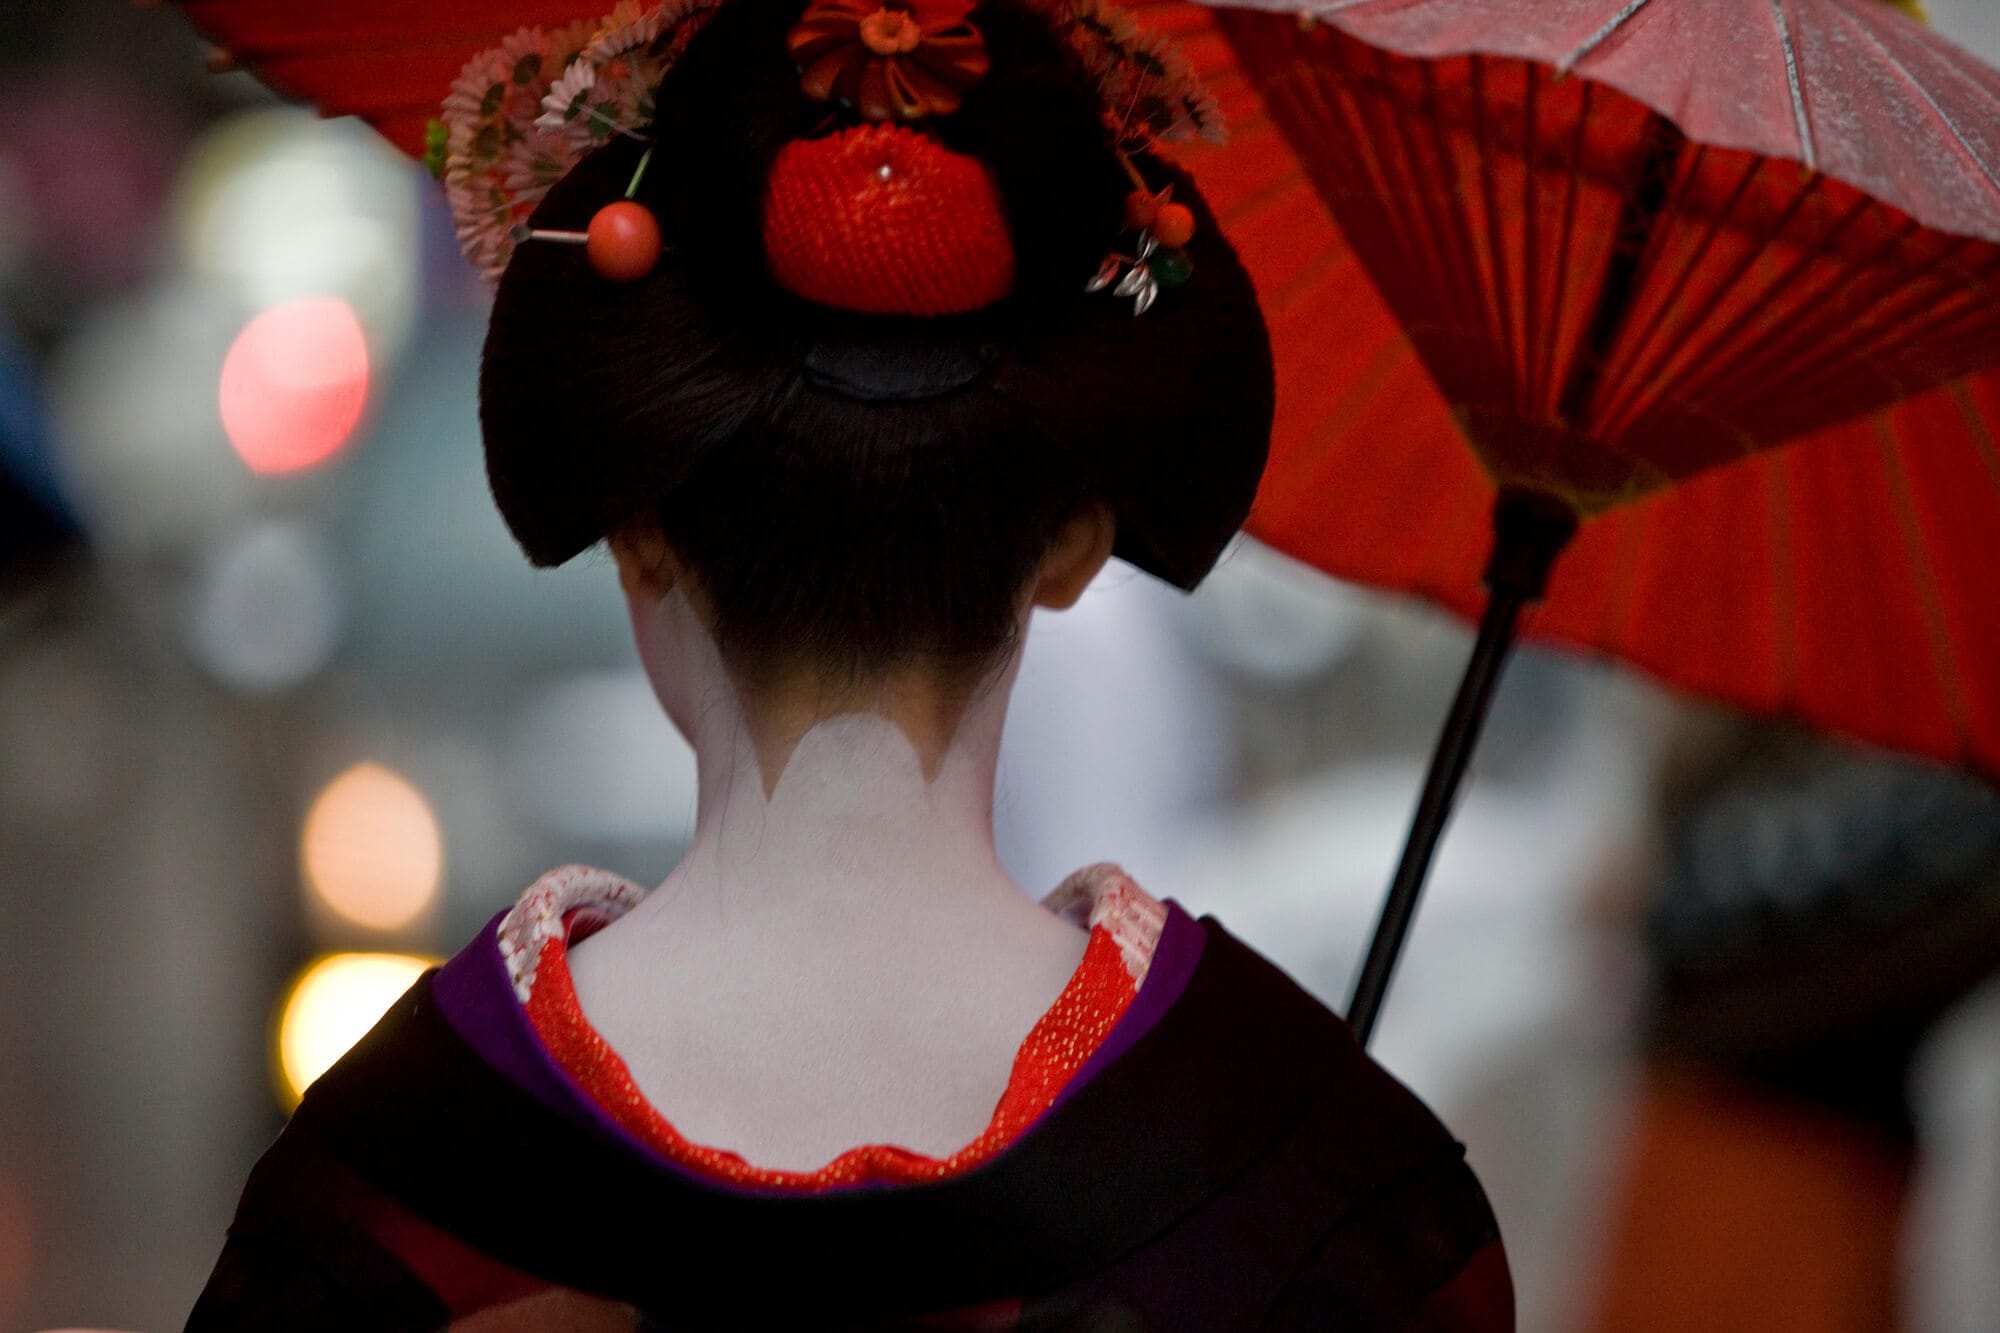 Travel bloggers reveal their most unforgettable travel experience ever - An incredible geisha experience in Japan